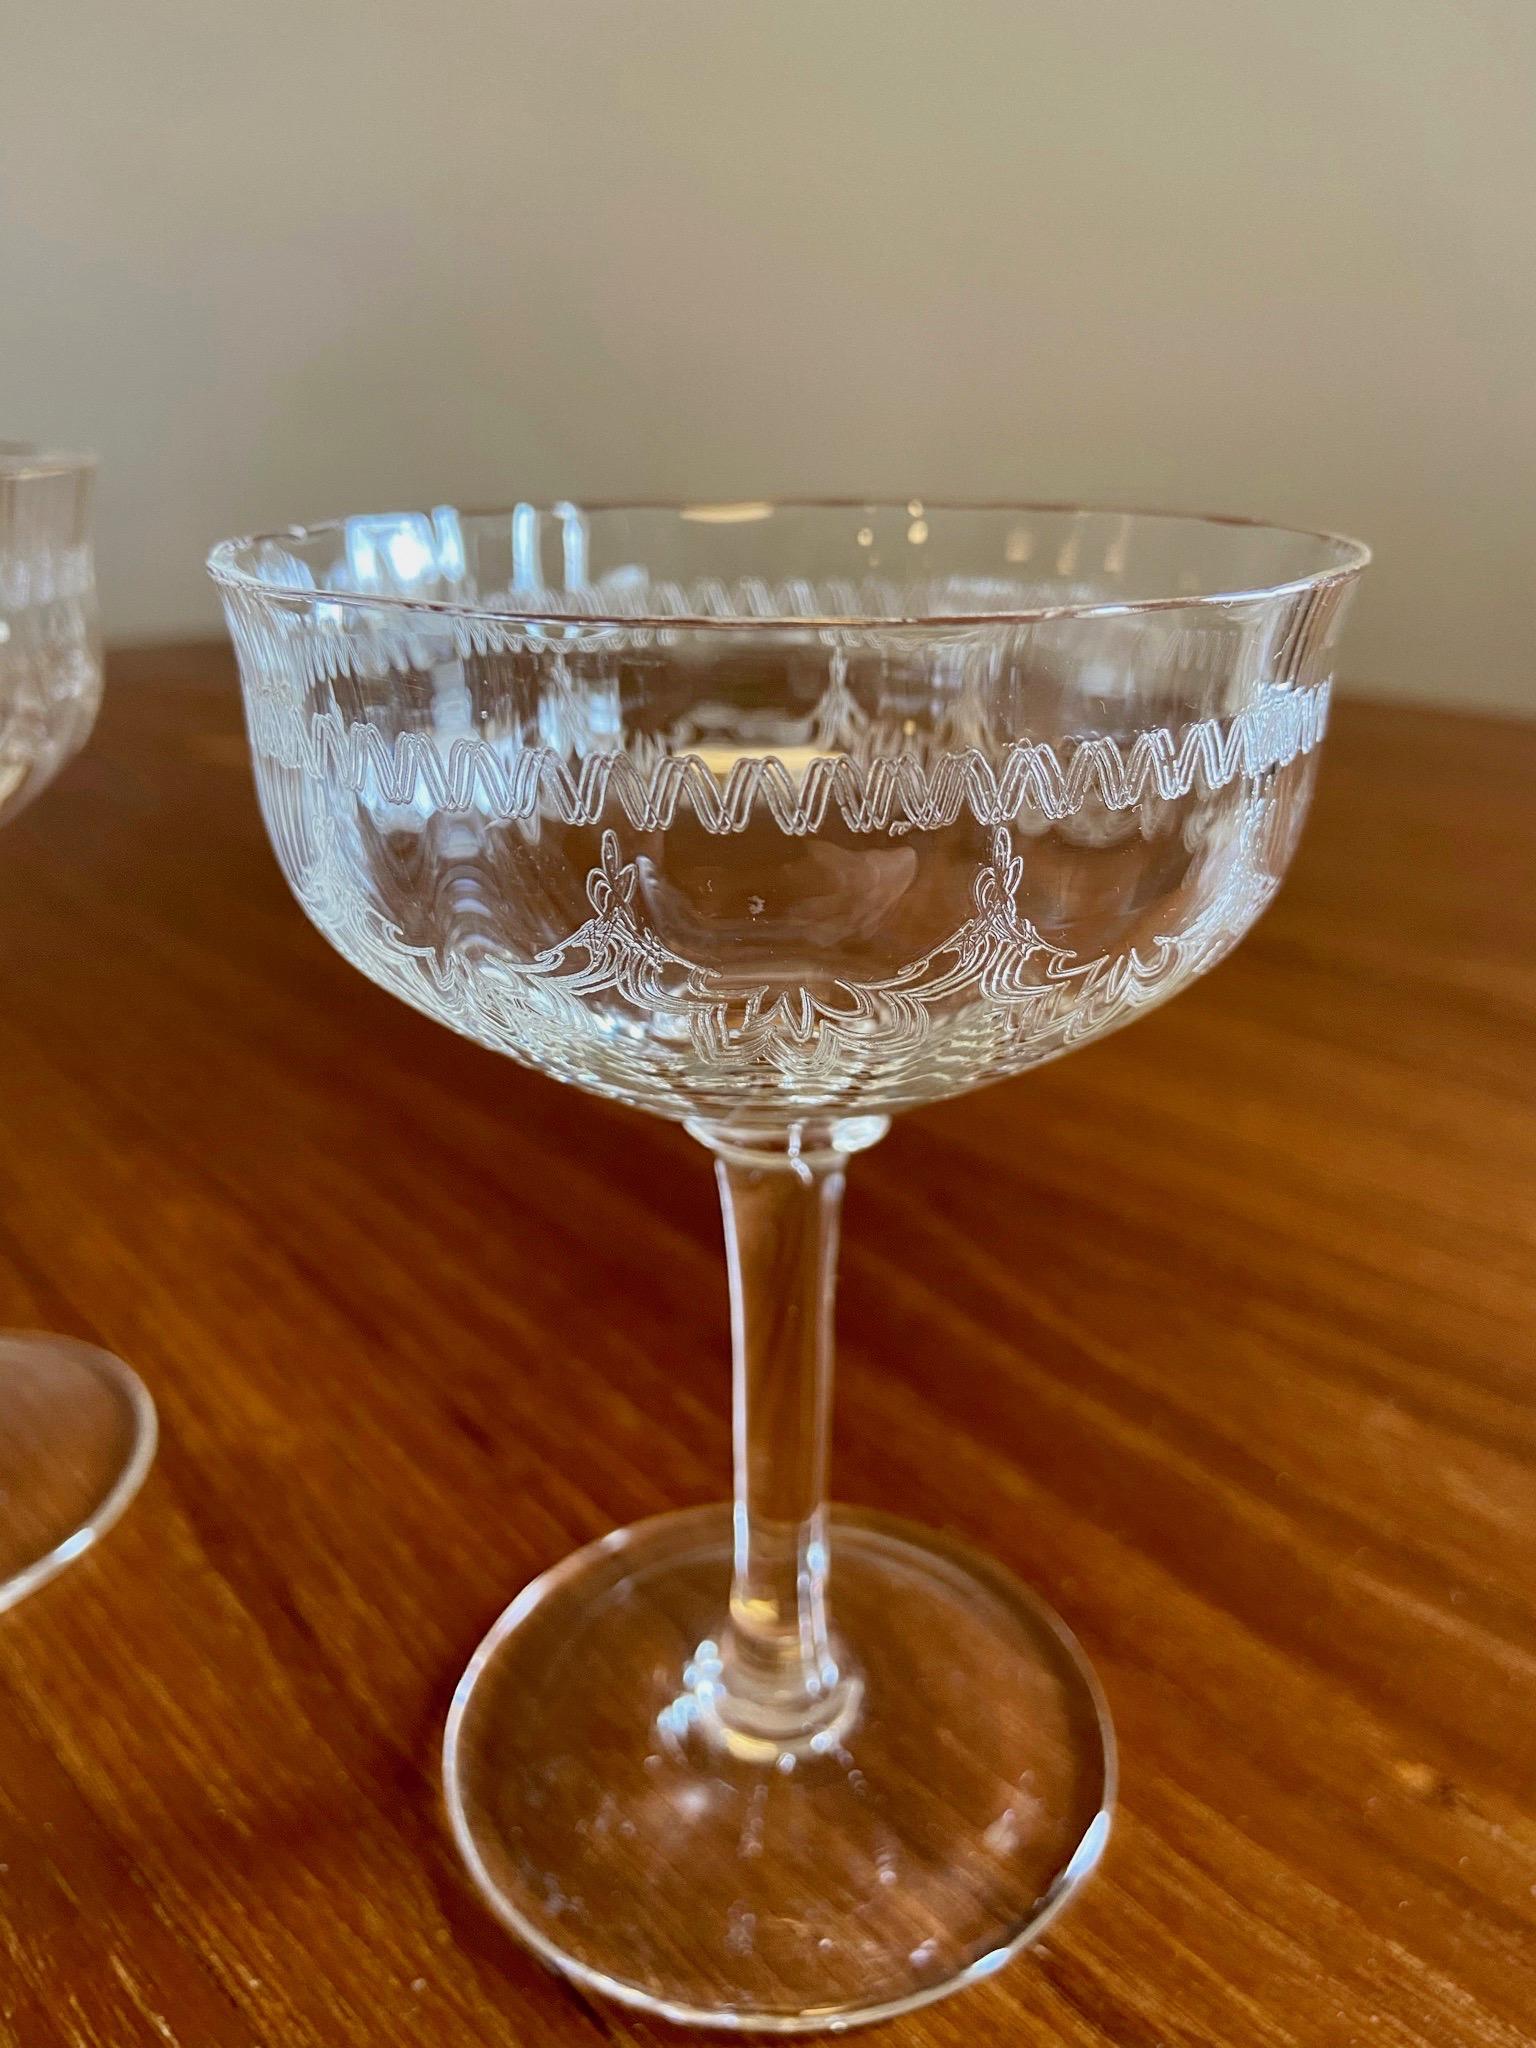 French Rare Wine and Champagne Crystal Glasses from 1900-1920, handmade, mouth-blown